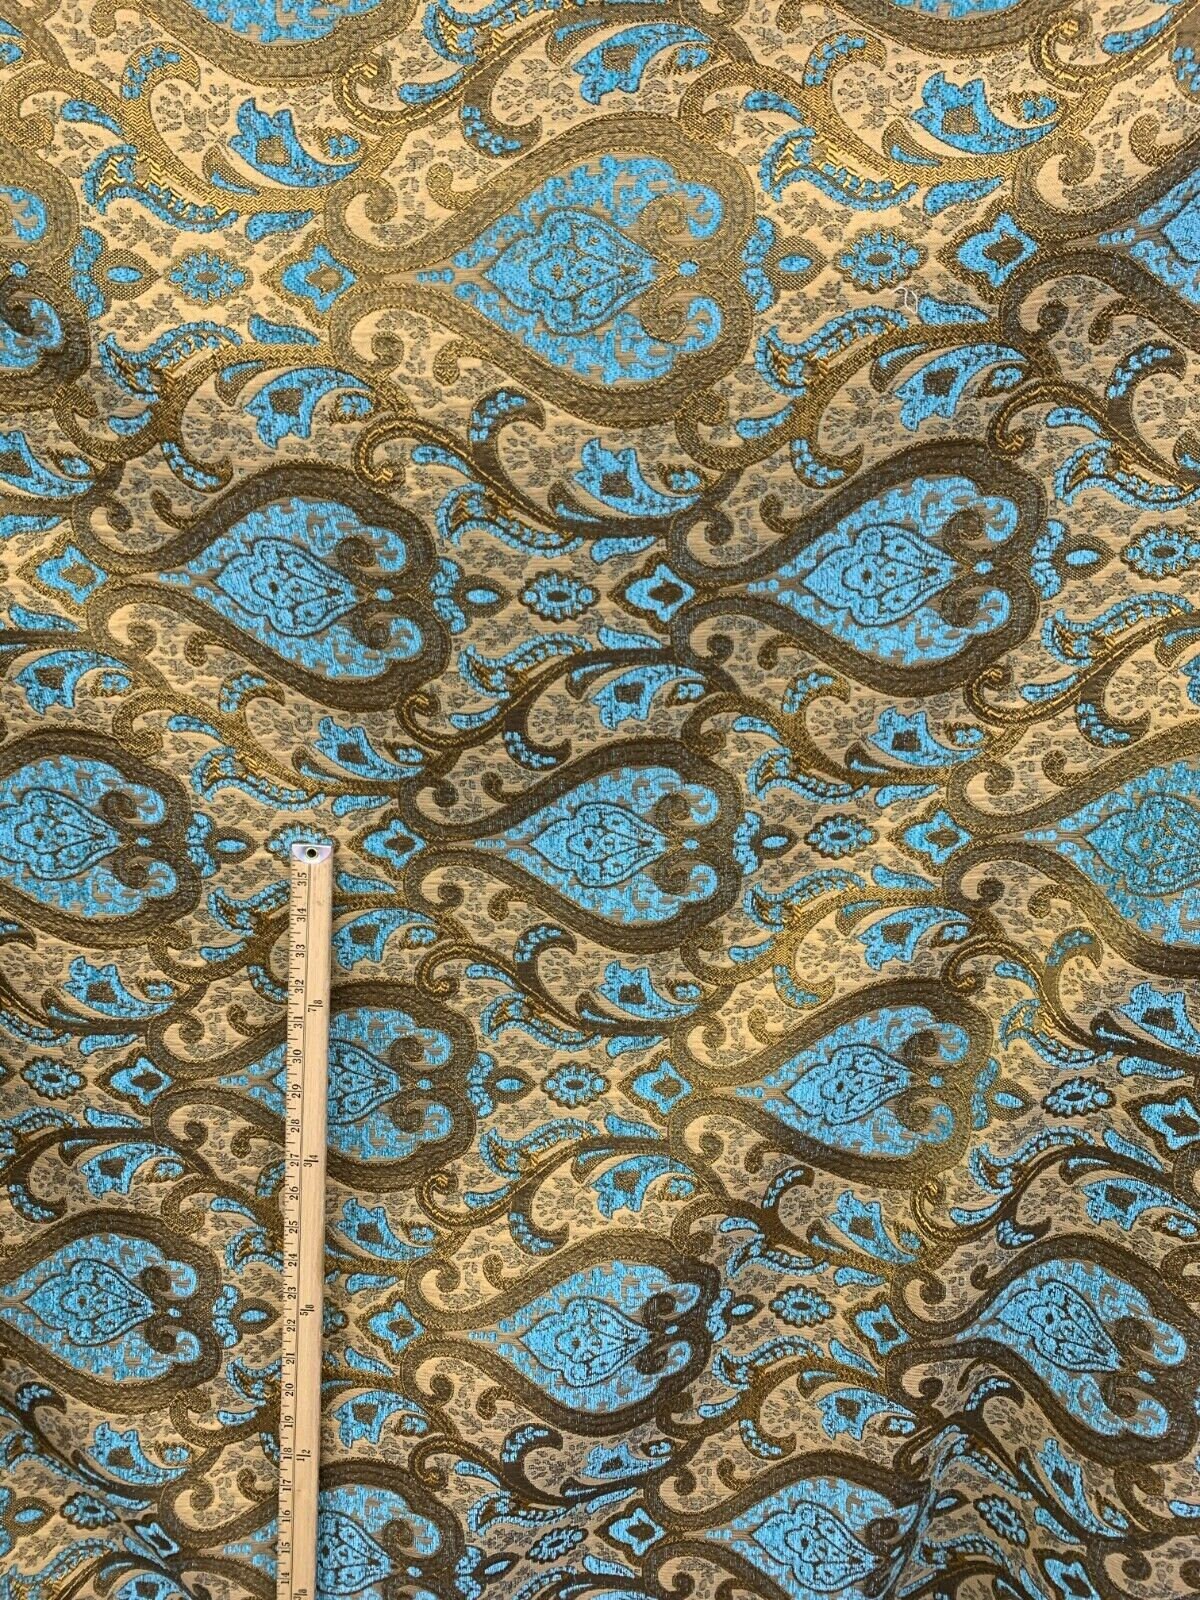 TURQUOISE BLUE GOLD Damask Chenille Upholstery Brocade Fabric (56 in.) Sold By The Yard